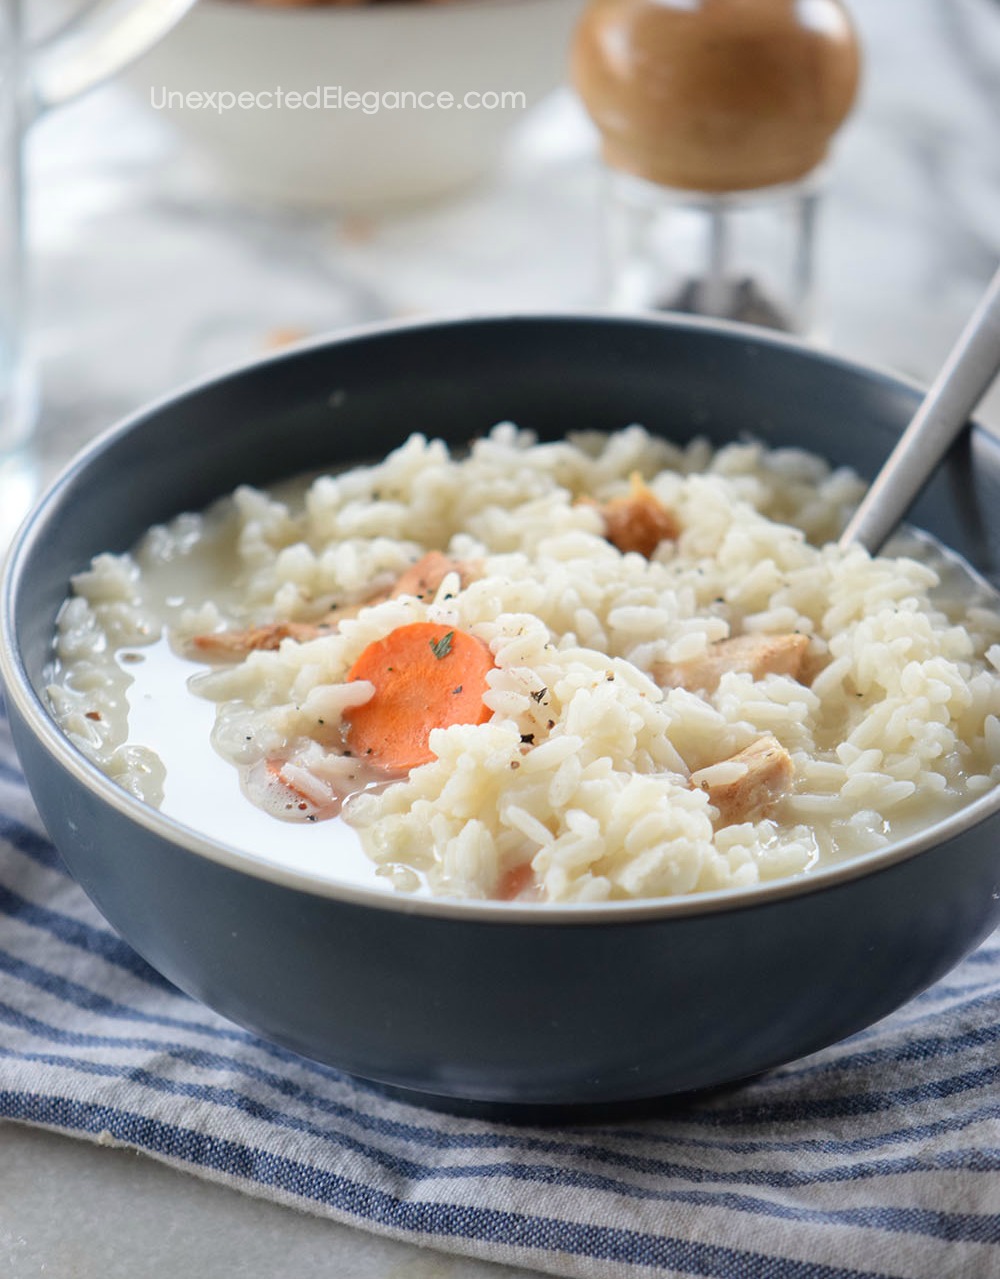 This creamy rice and chicken soup recipe is perfect for a cold night!